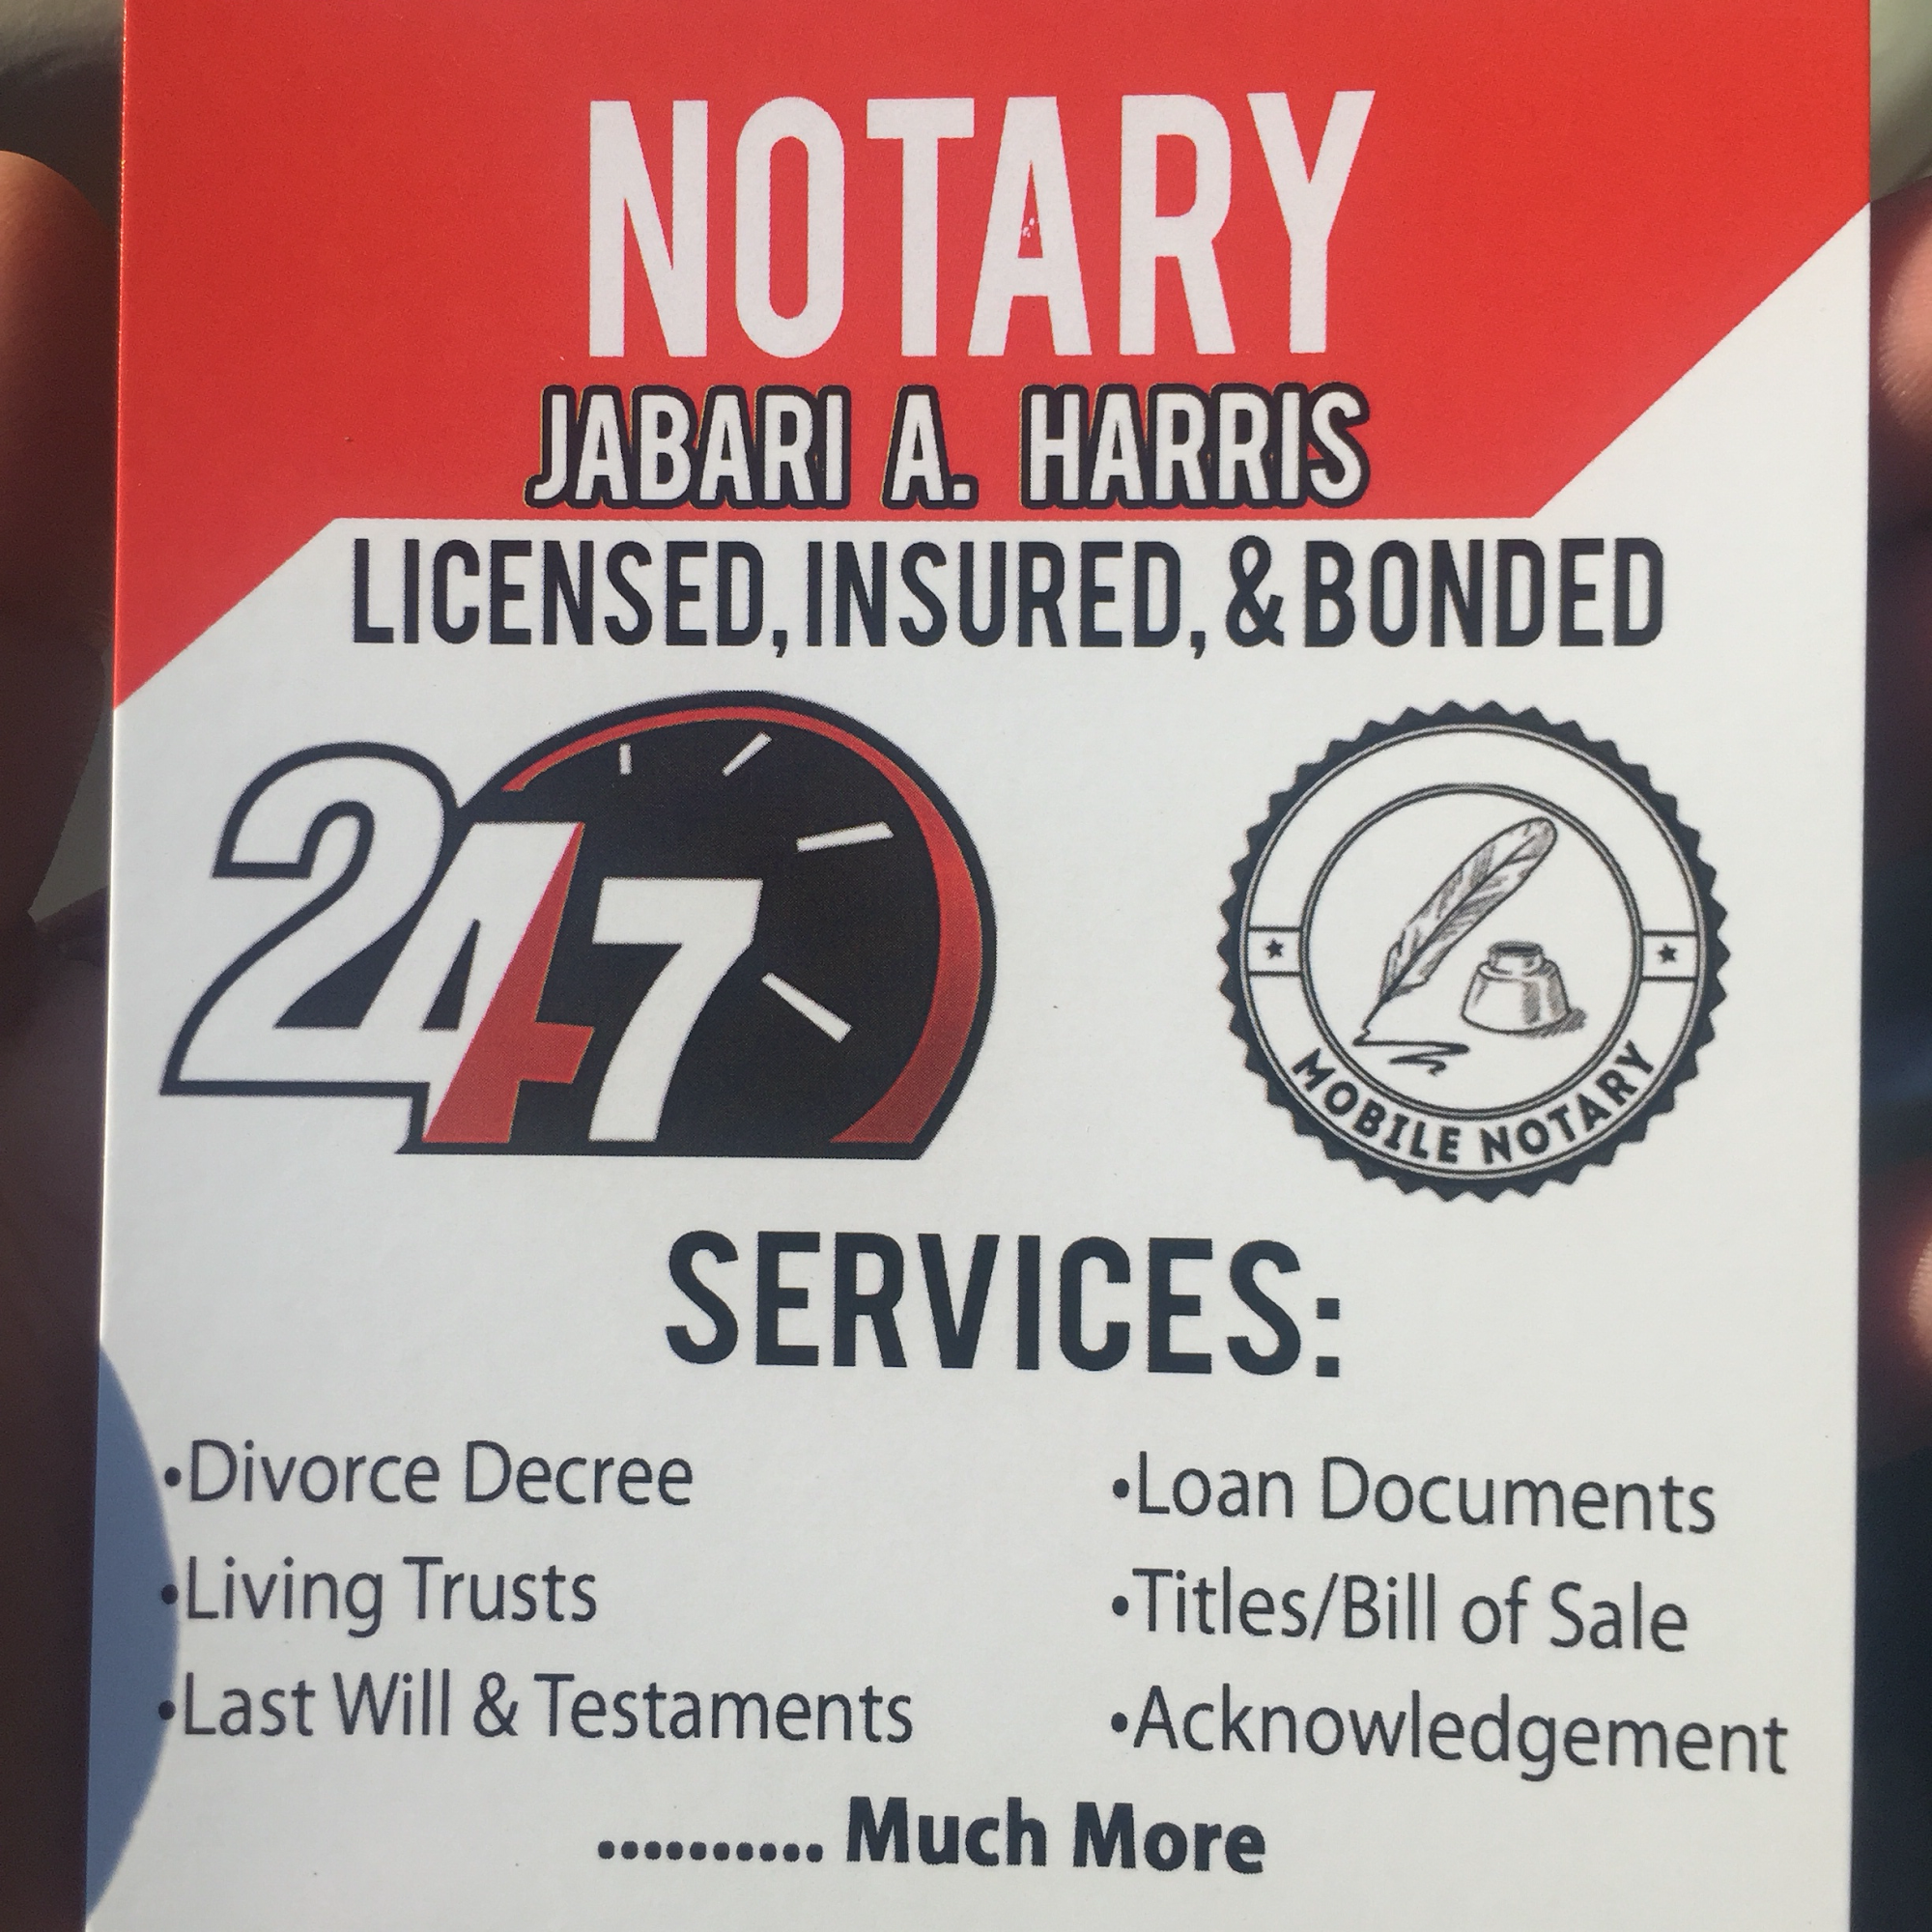 Harris Mobile Notary 501 Paddle Dr, Crowley Texas 76036